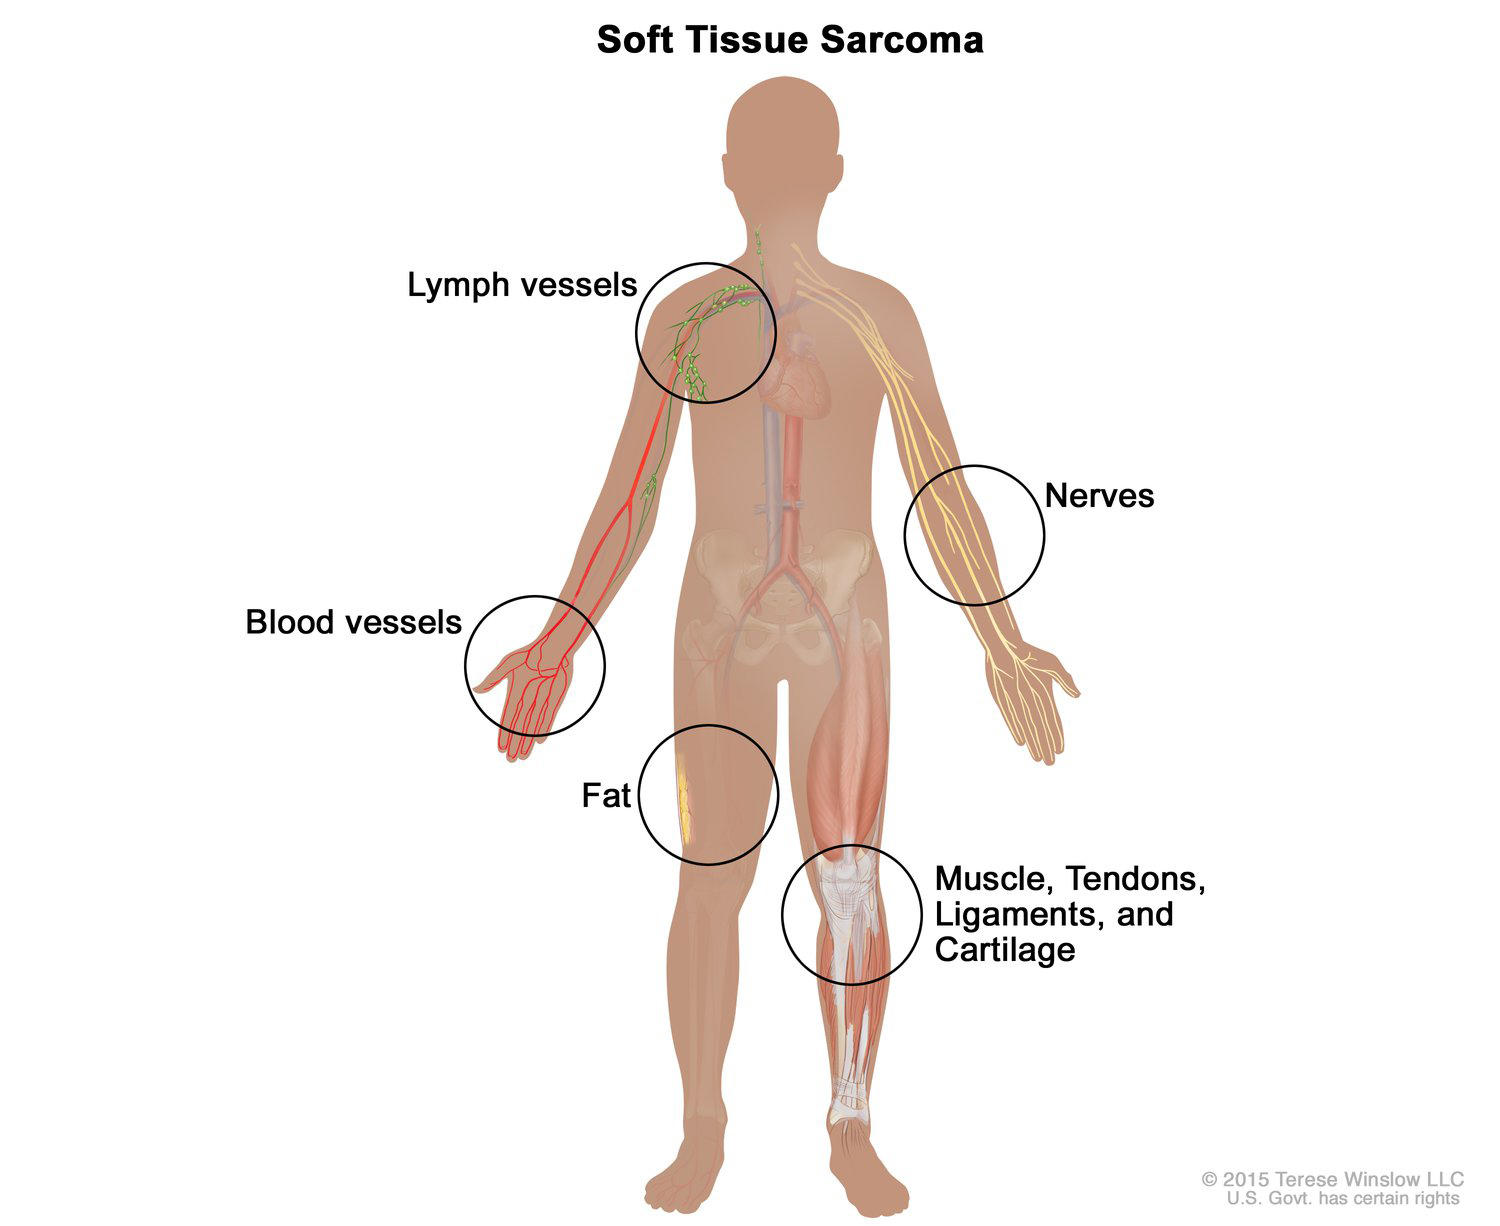 london cancer sarcoma guidelines